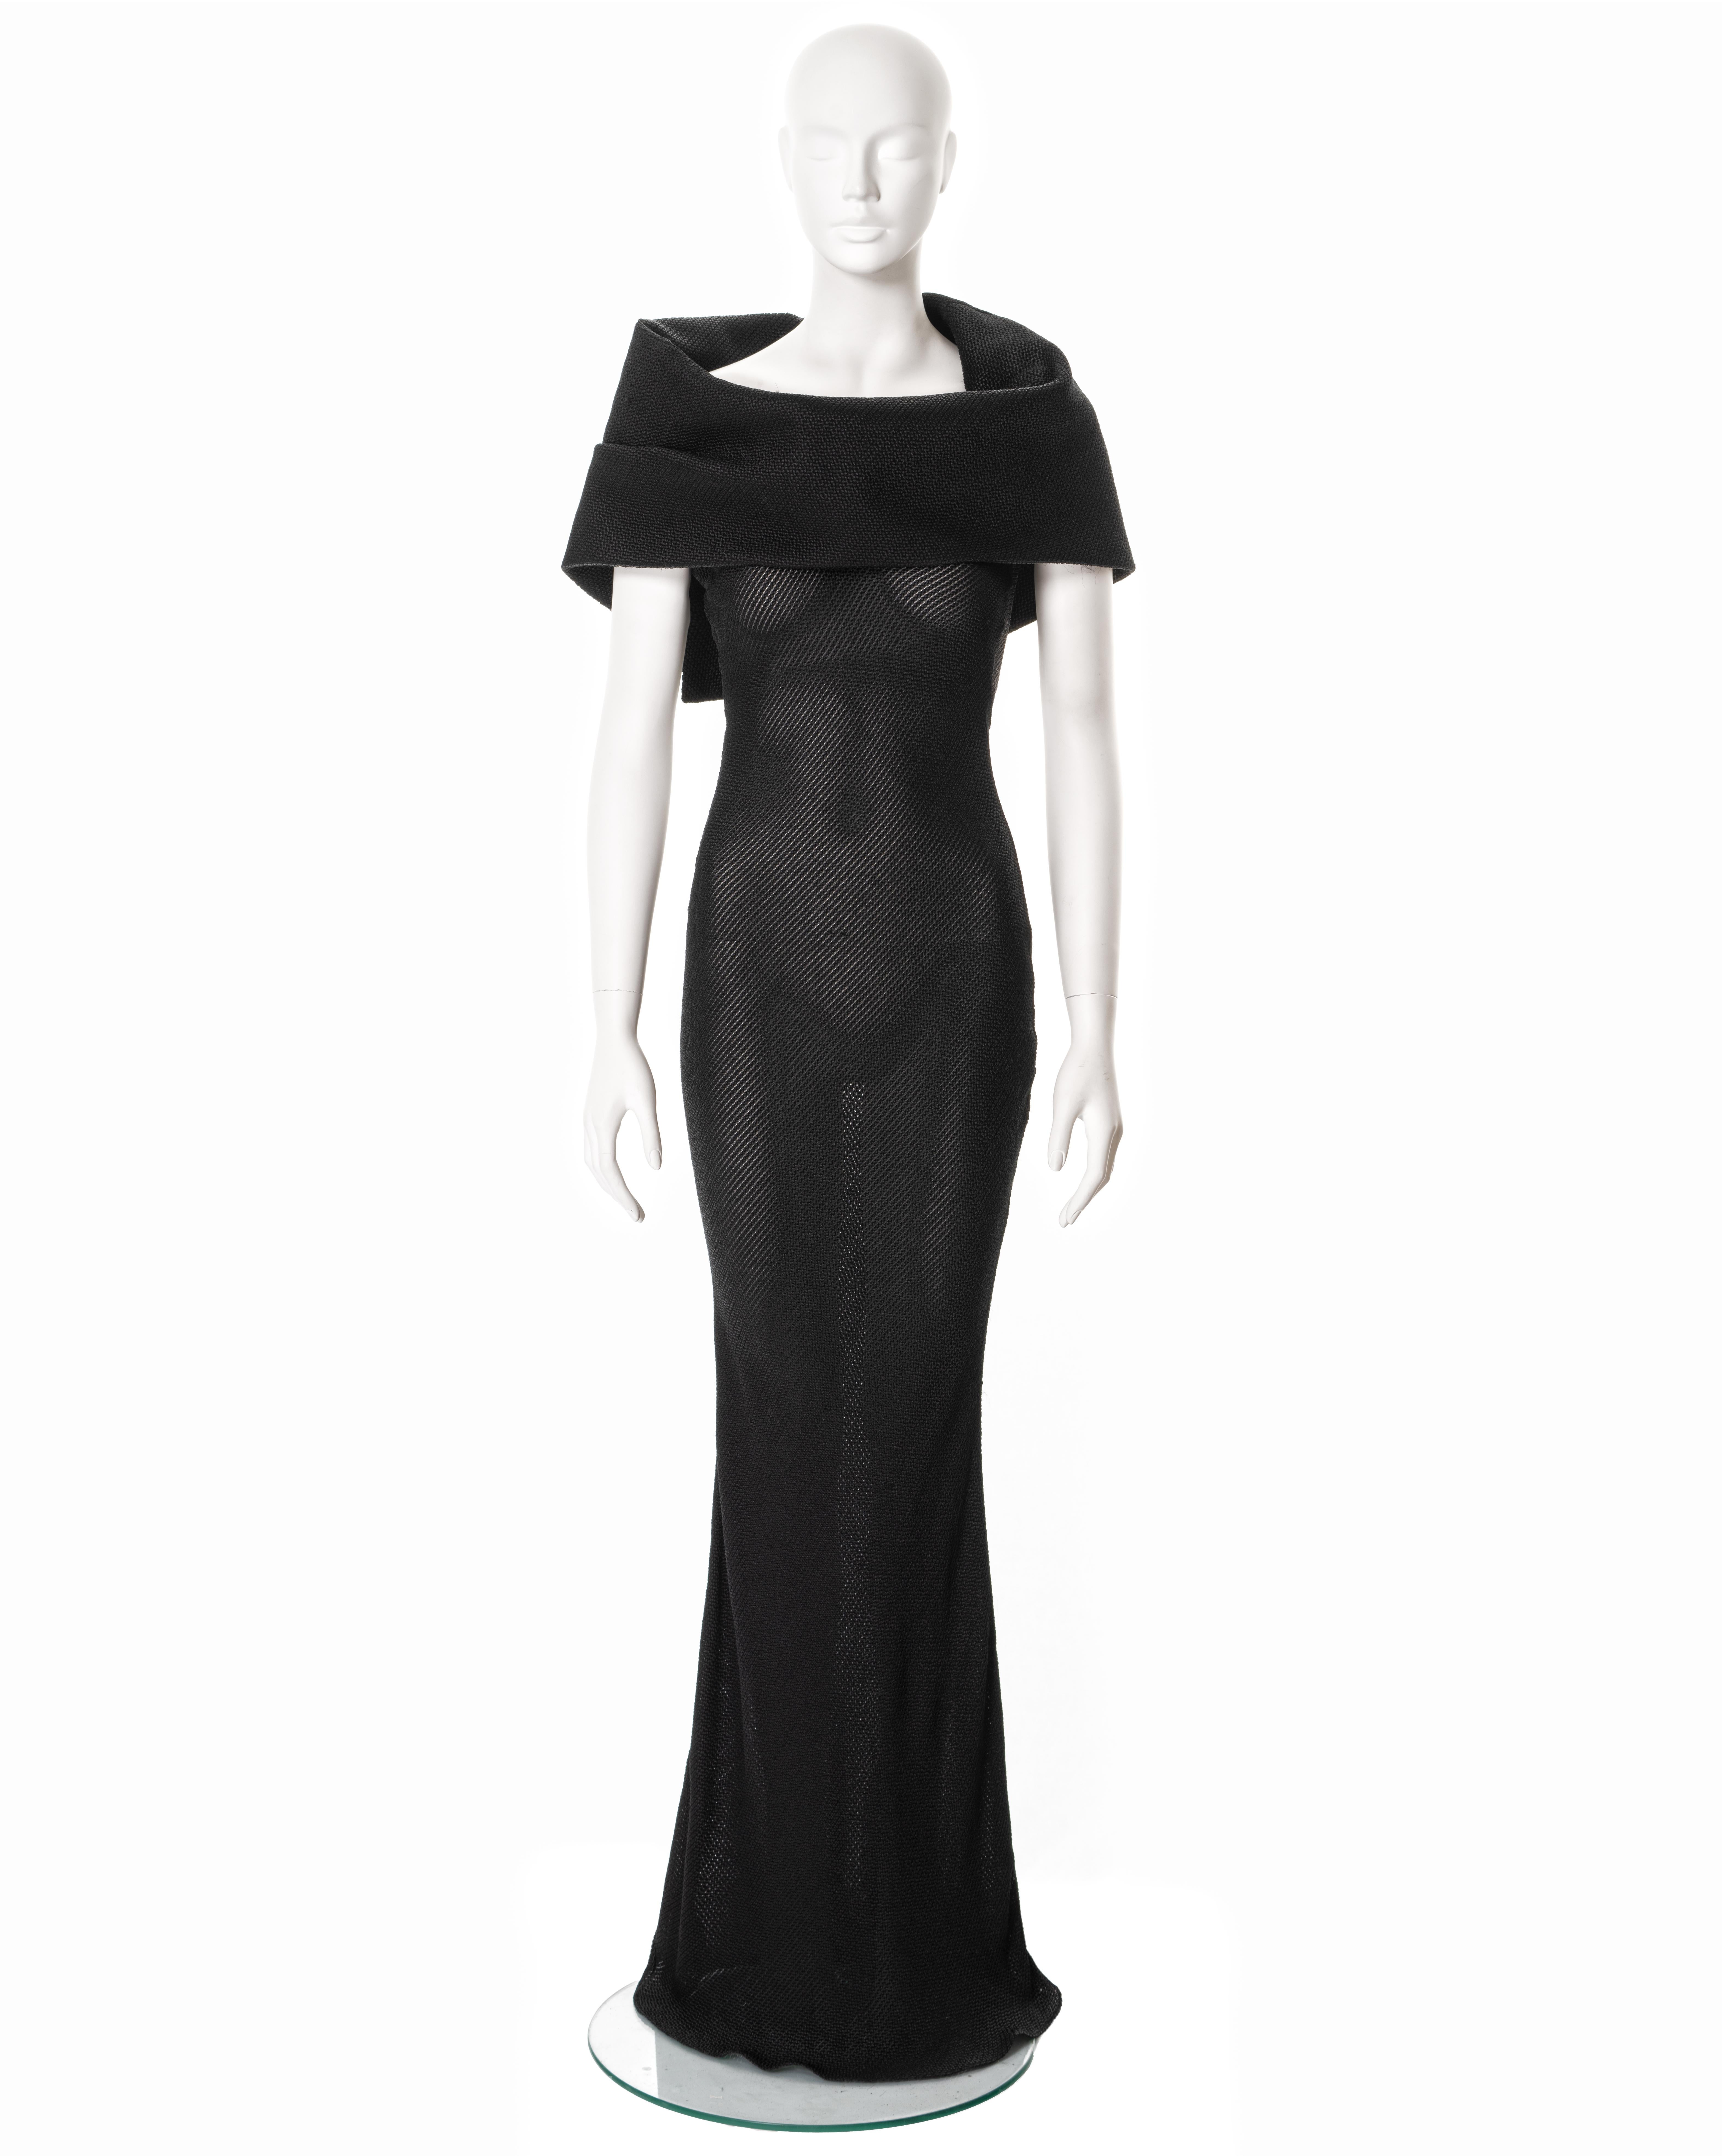 ▪ John Galliano black evening dress
▪ Sold by One of a Kind Archive
▪ Fall-Winter 1999
▪ Constructed from black bias-cut viscose with embroidered silk stripes 
▪ Large draped turn-over collar 
▪ Floor-length skirt 
▪ Size FR 36 - UK 8 
▪ Made in